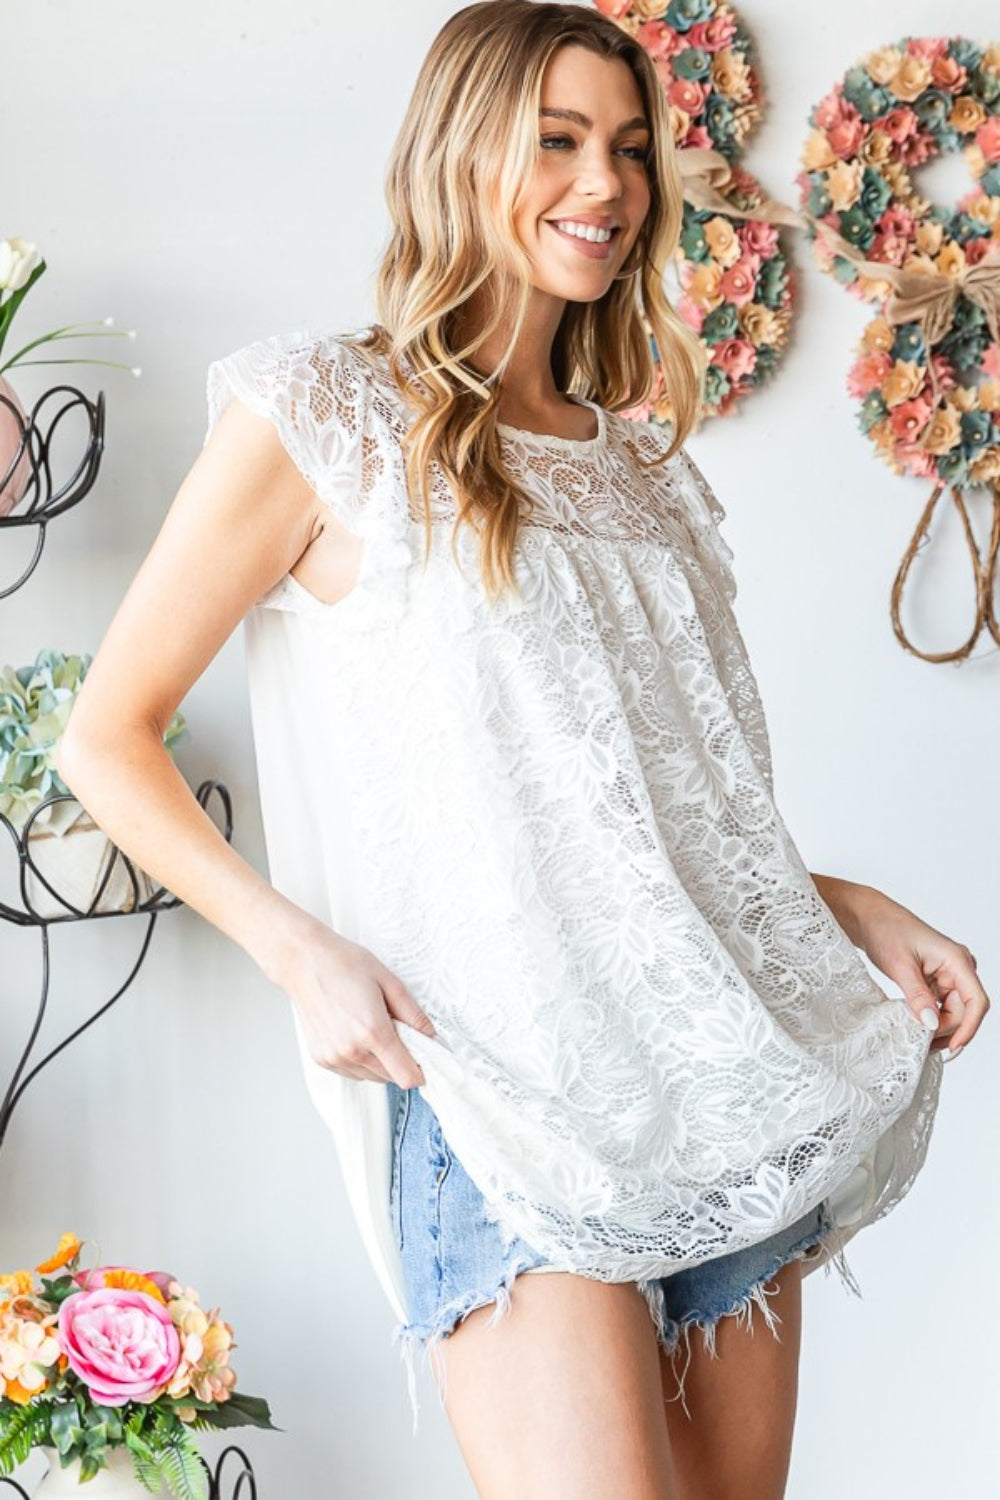 This round neck cap sleeve lace top is elegant and feminine, perfect for any occasion. The delicate lace detailing adds a touch of sophistication, while the cap sleeves provide a flattering and comfortable fit.  S - 3X